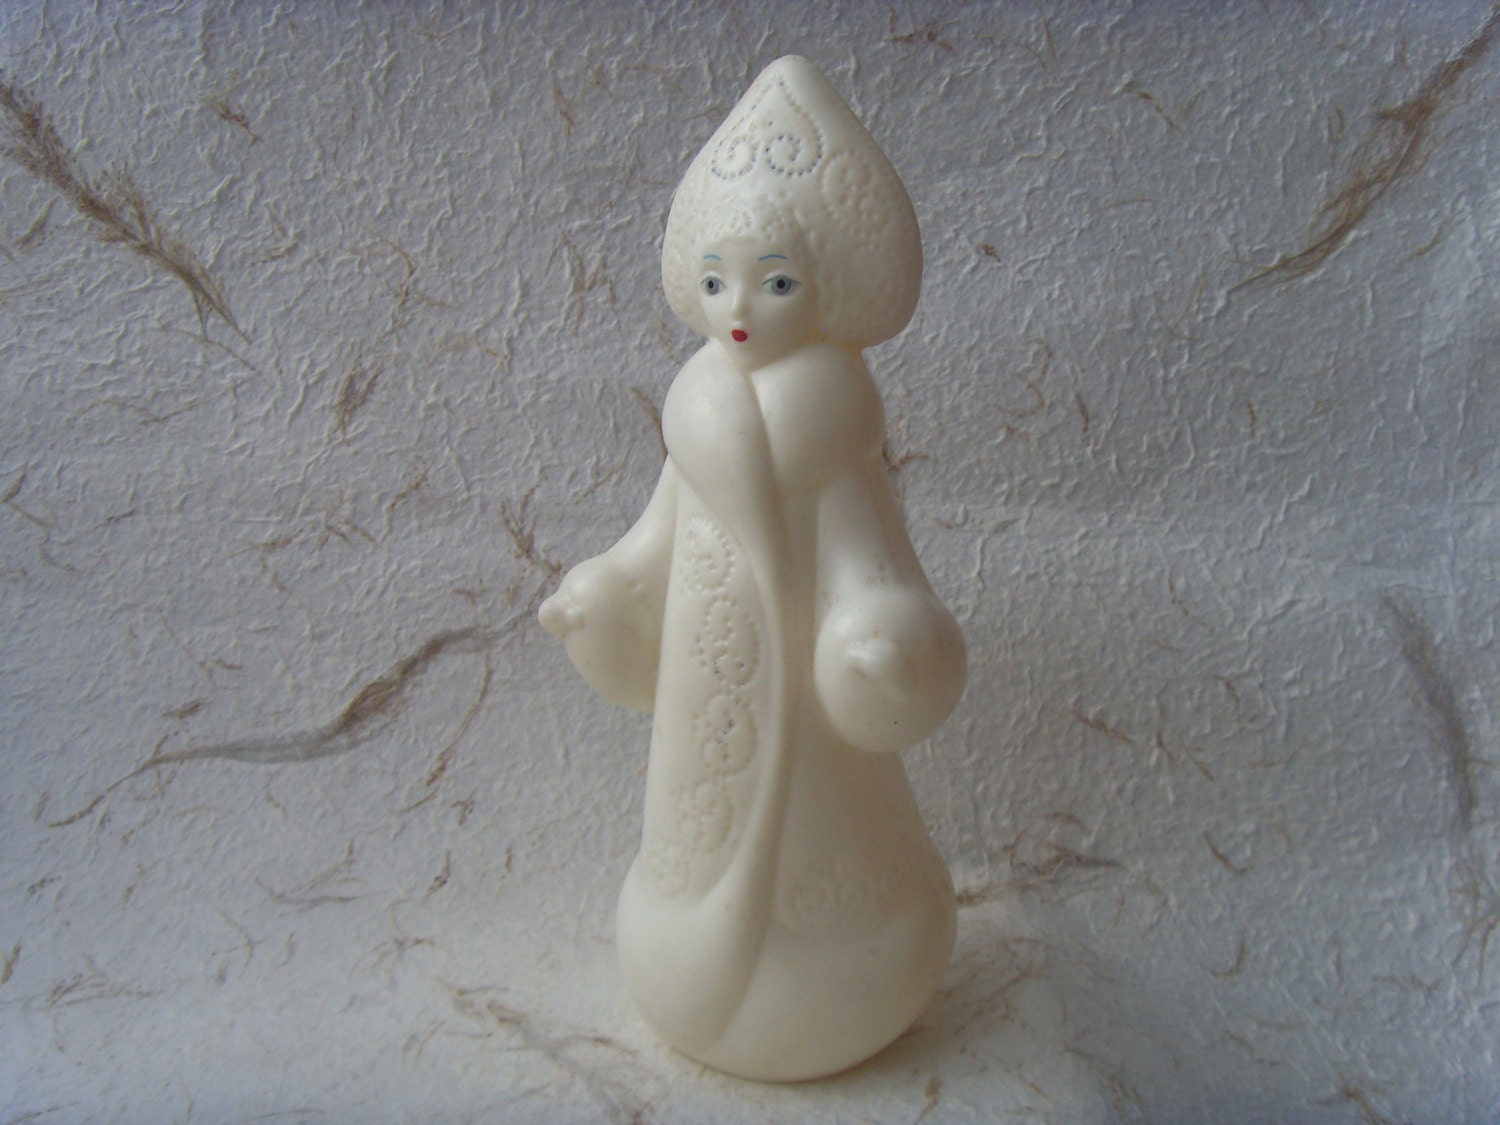 Soviet Vintage Snow Maiden Doll Made in USSR in 1970s - Astra9